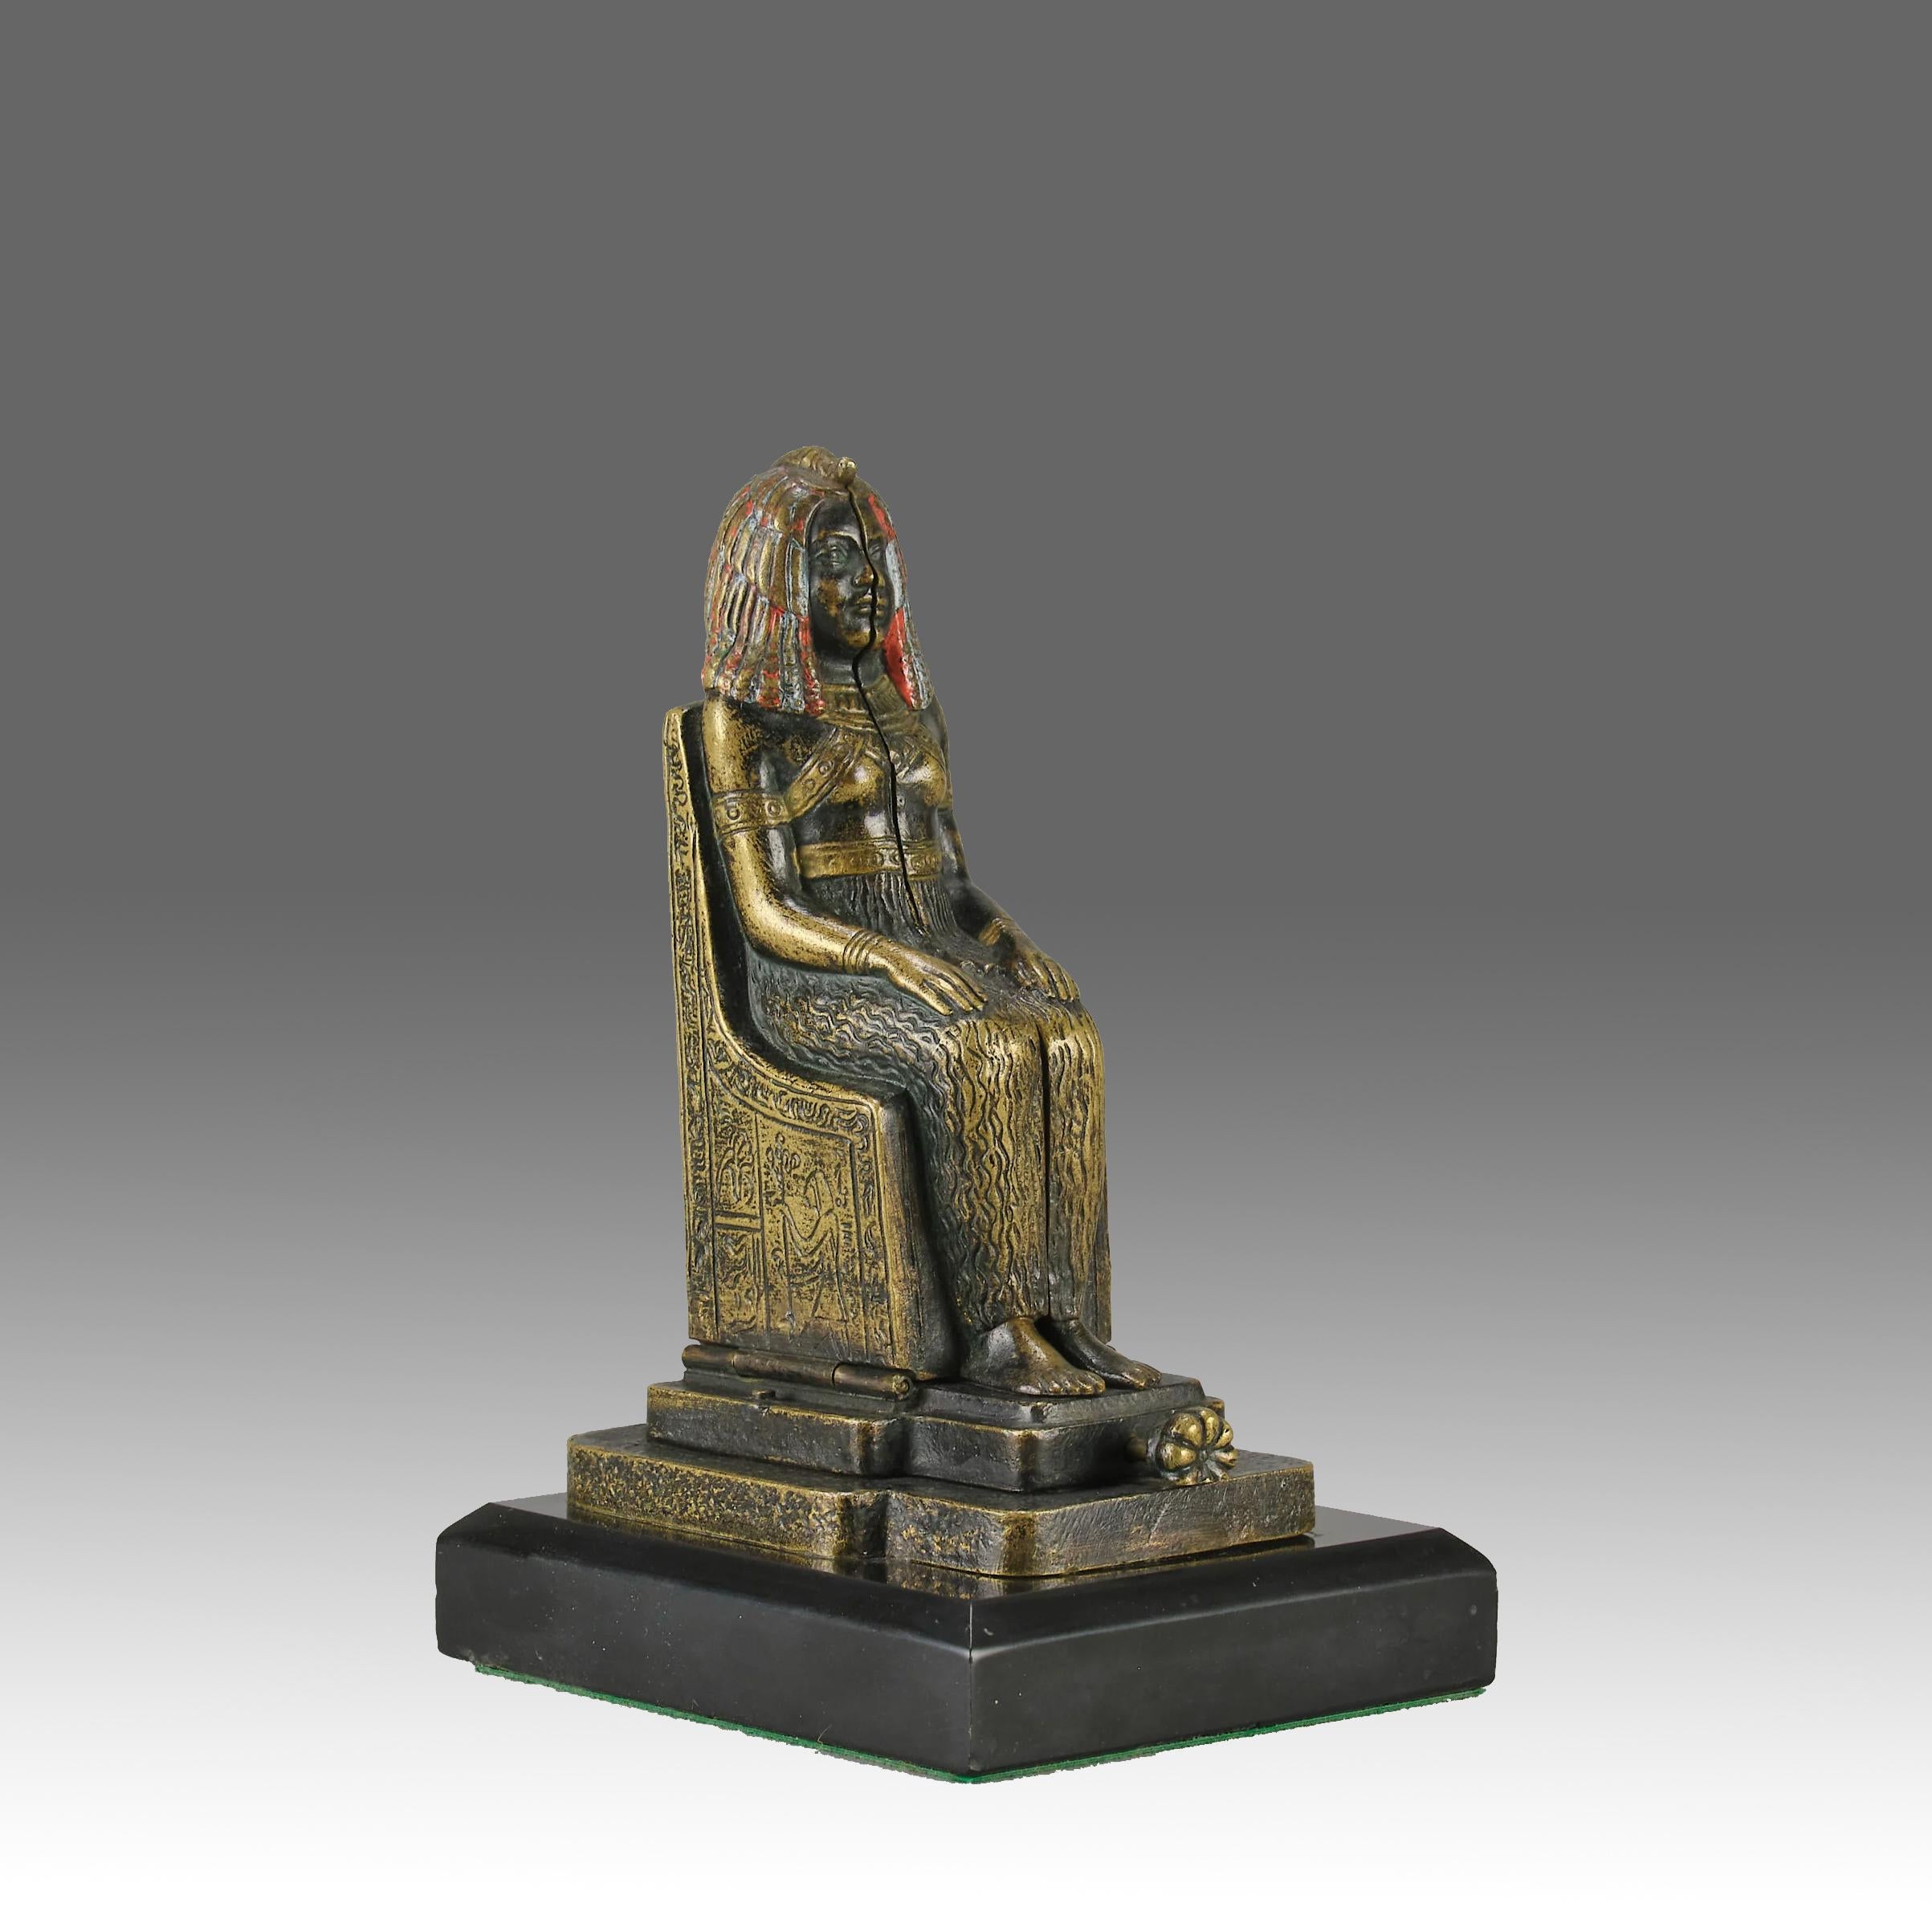 An amusing early 20th century cold painted Austrian bronze figure modelled as a seated ancient Egyptian deity hinged to reveal an erotic beauty with fine golden colour, stamped with Bergman 'B' in an amphora vase.

ADDITIONAL INFORMATION
Height: